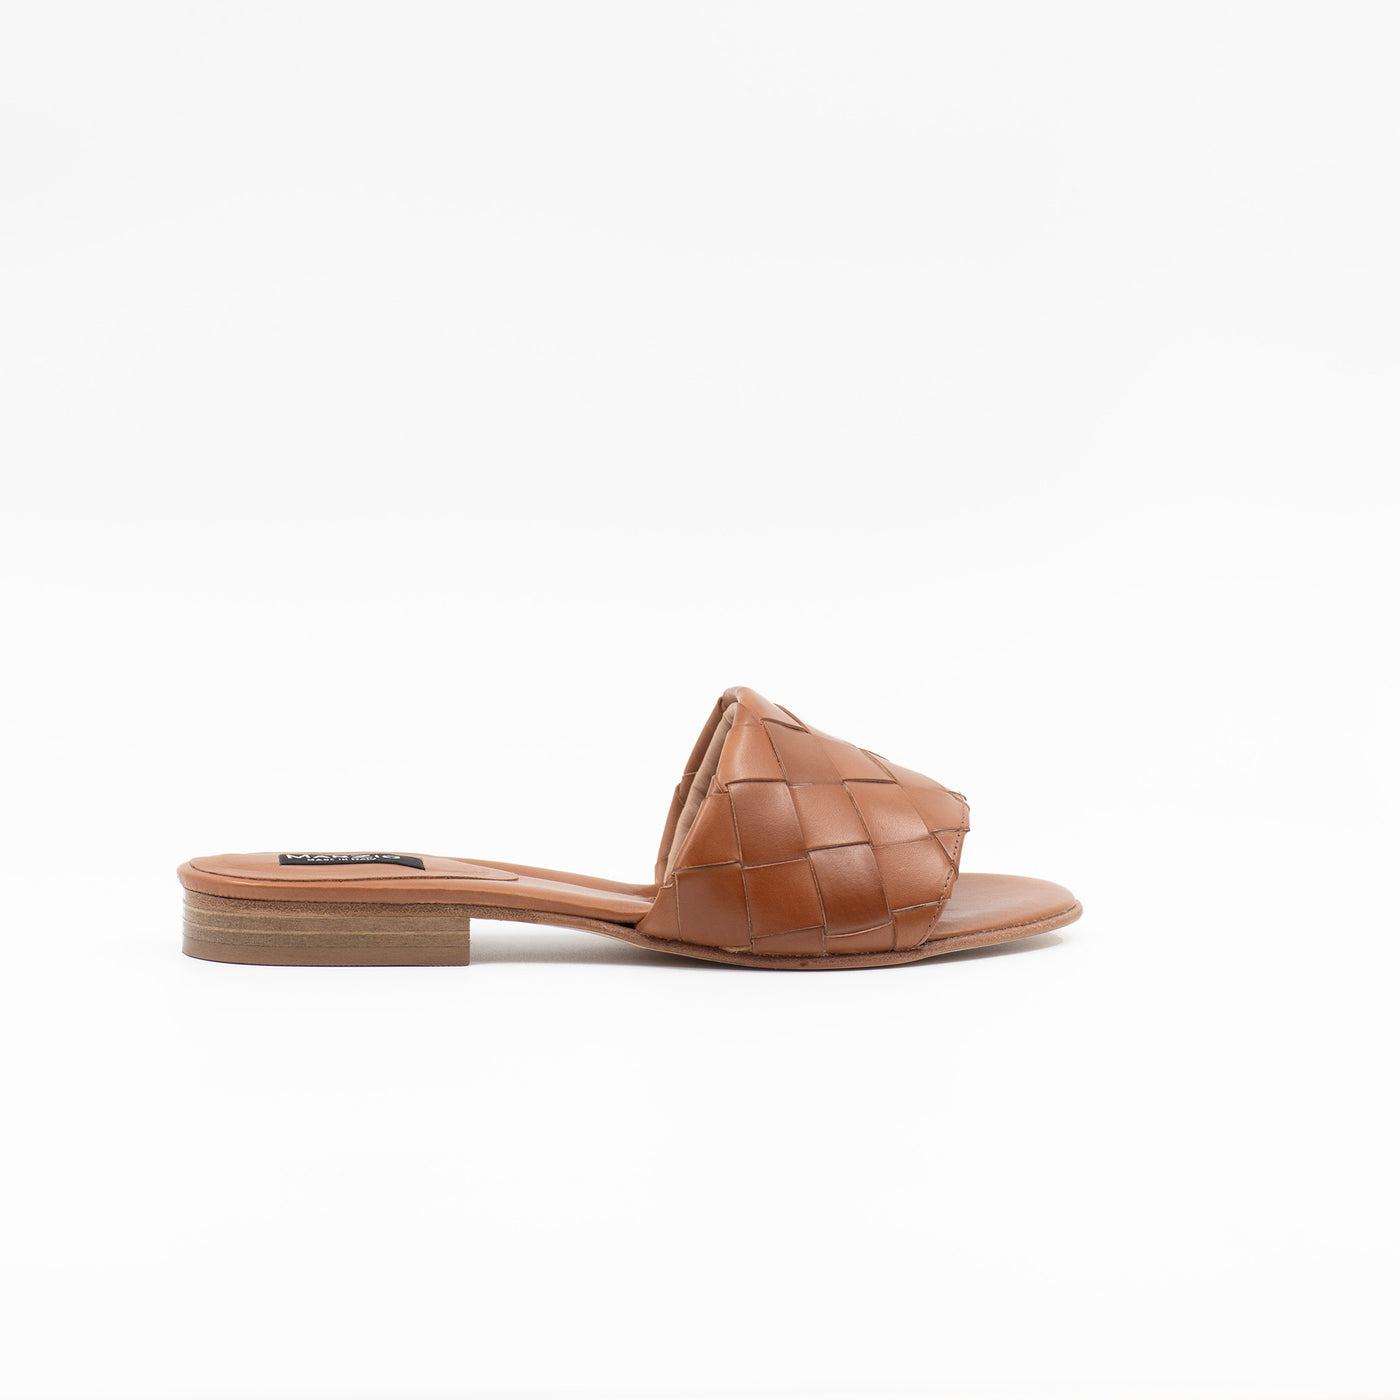 Braided Leather Sandals in Cognac